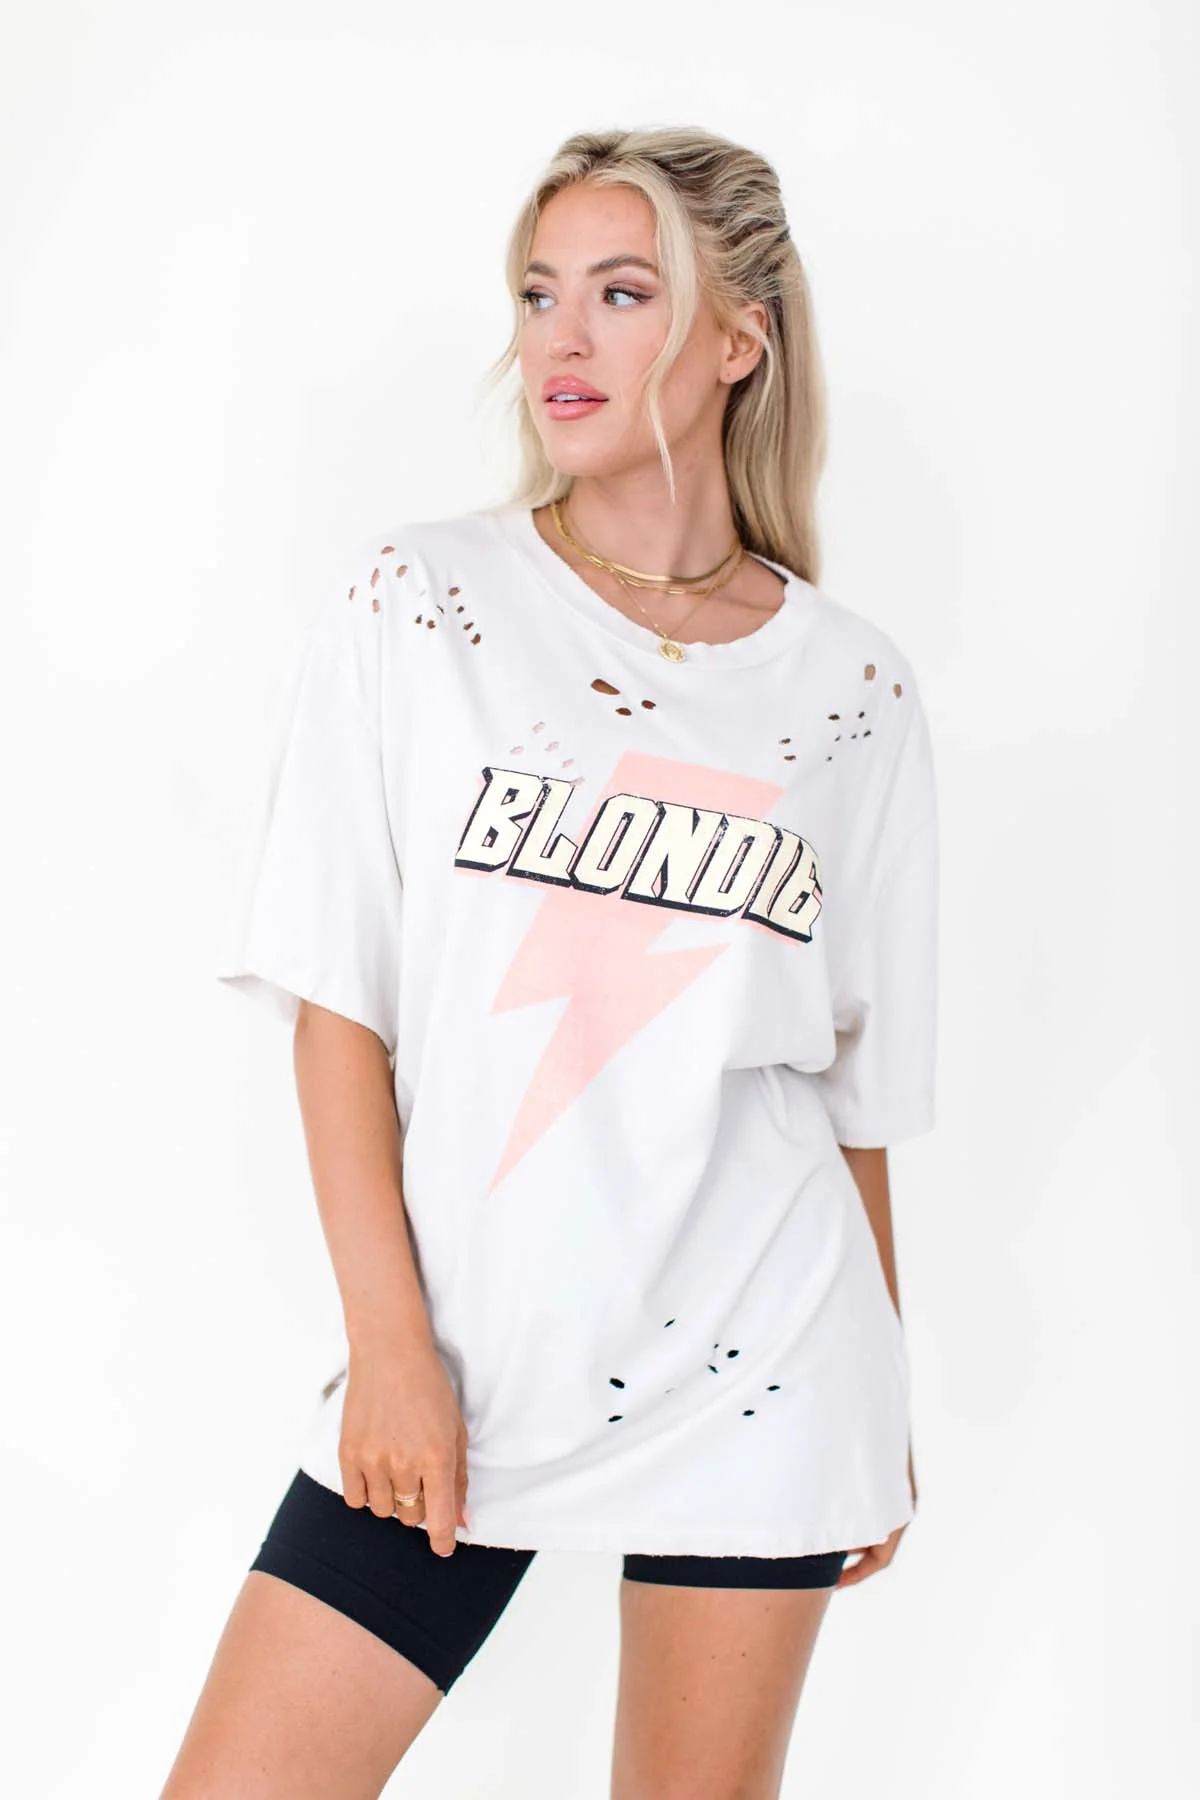 Blondie Distressed Graphic | The Post